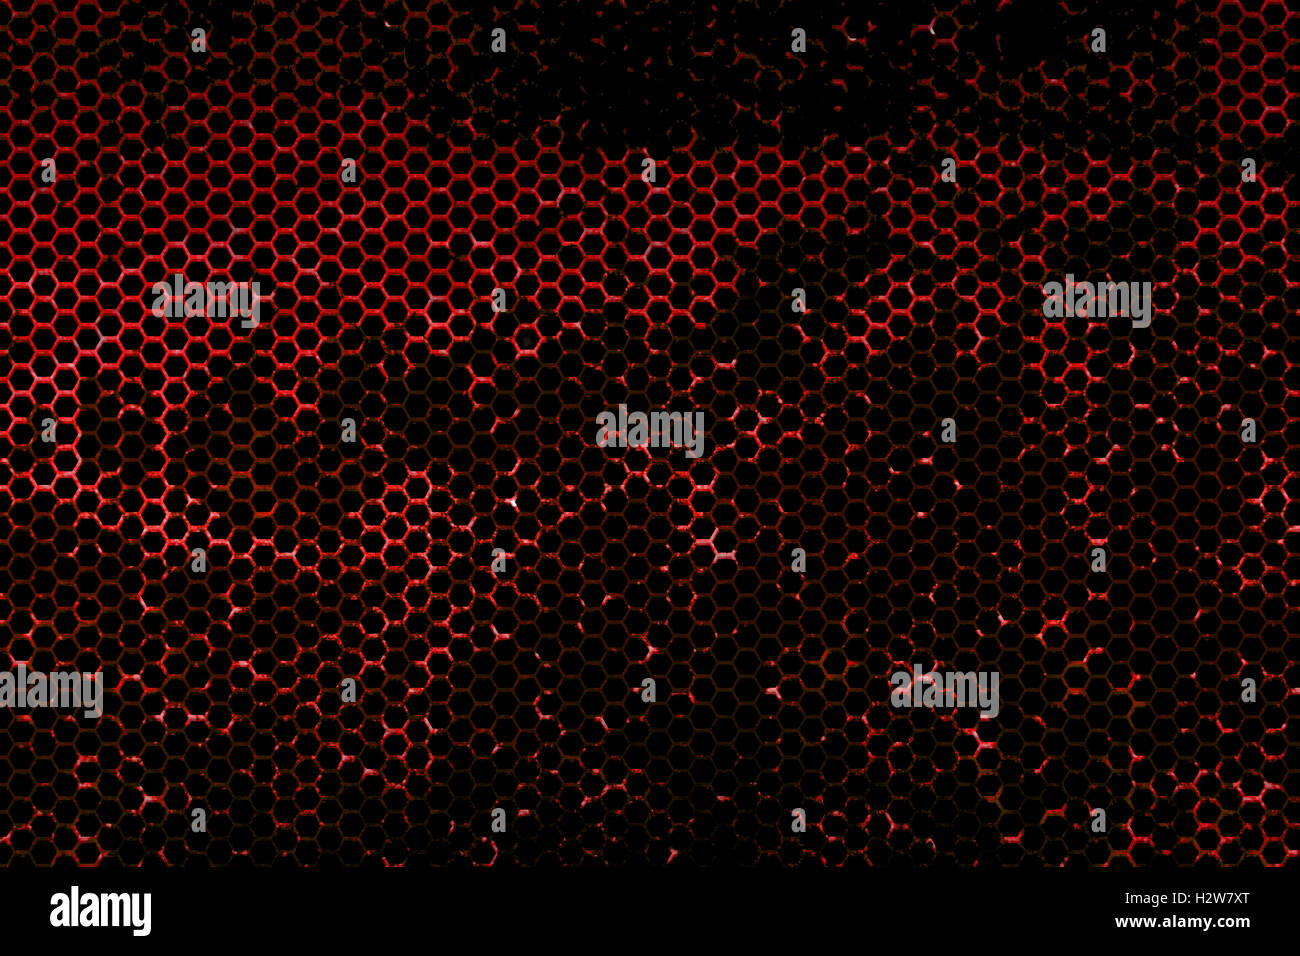 black and red metallic mesh fray  background texture. Stock Photo